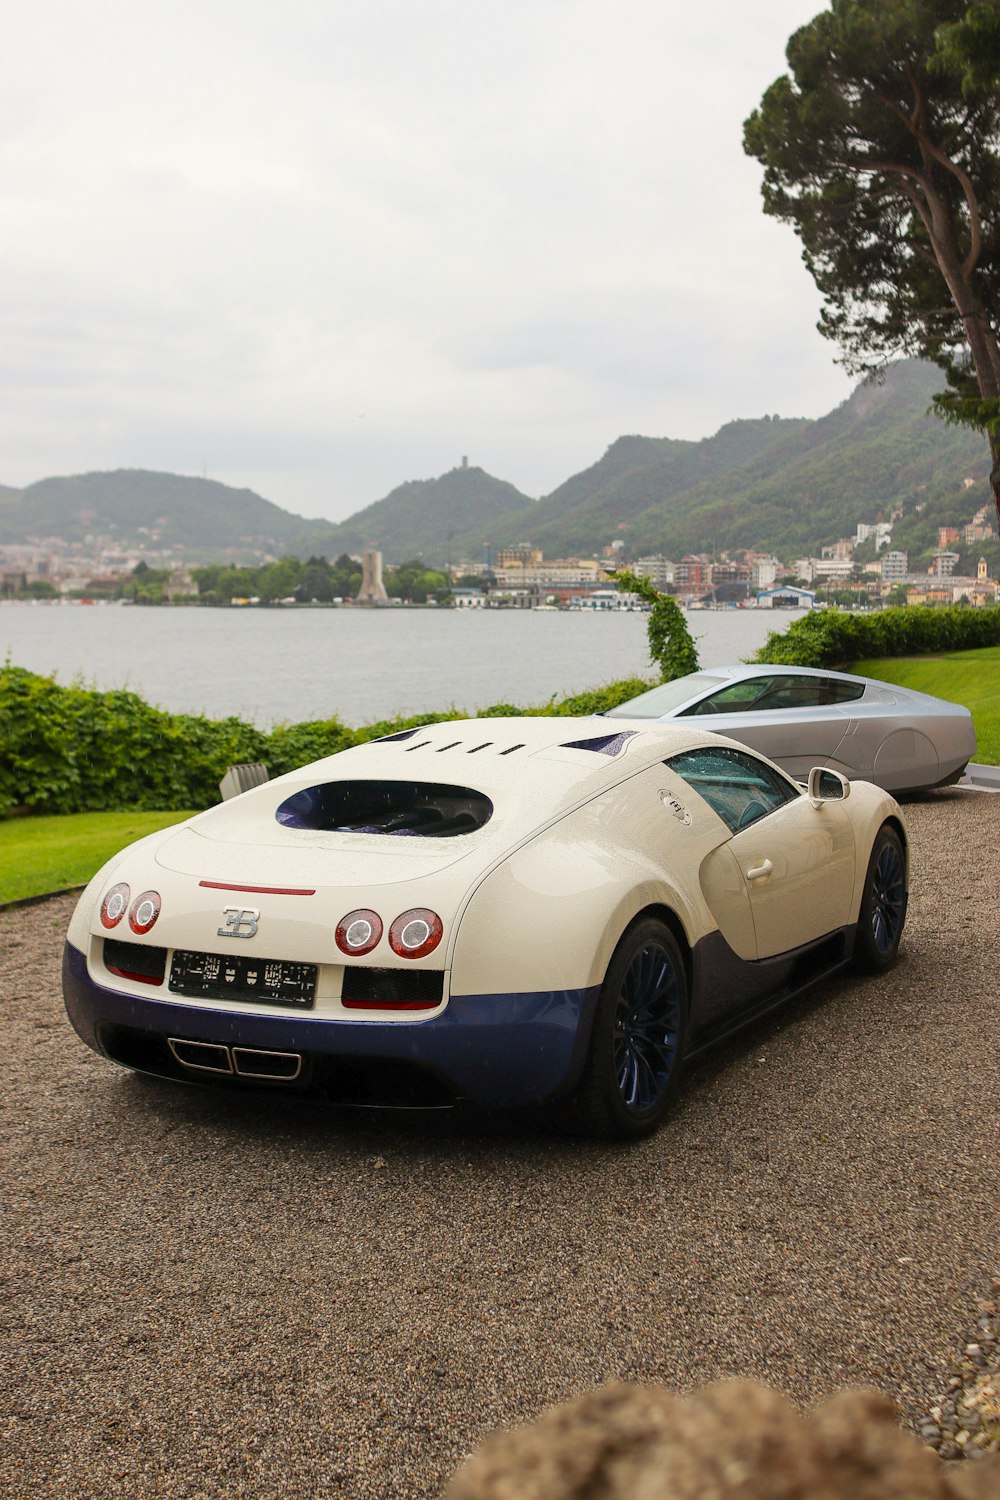 a white and blue bugatti parked in front of a lake